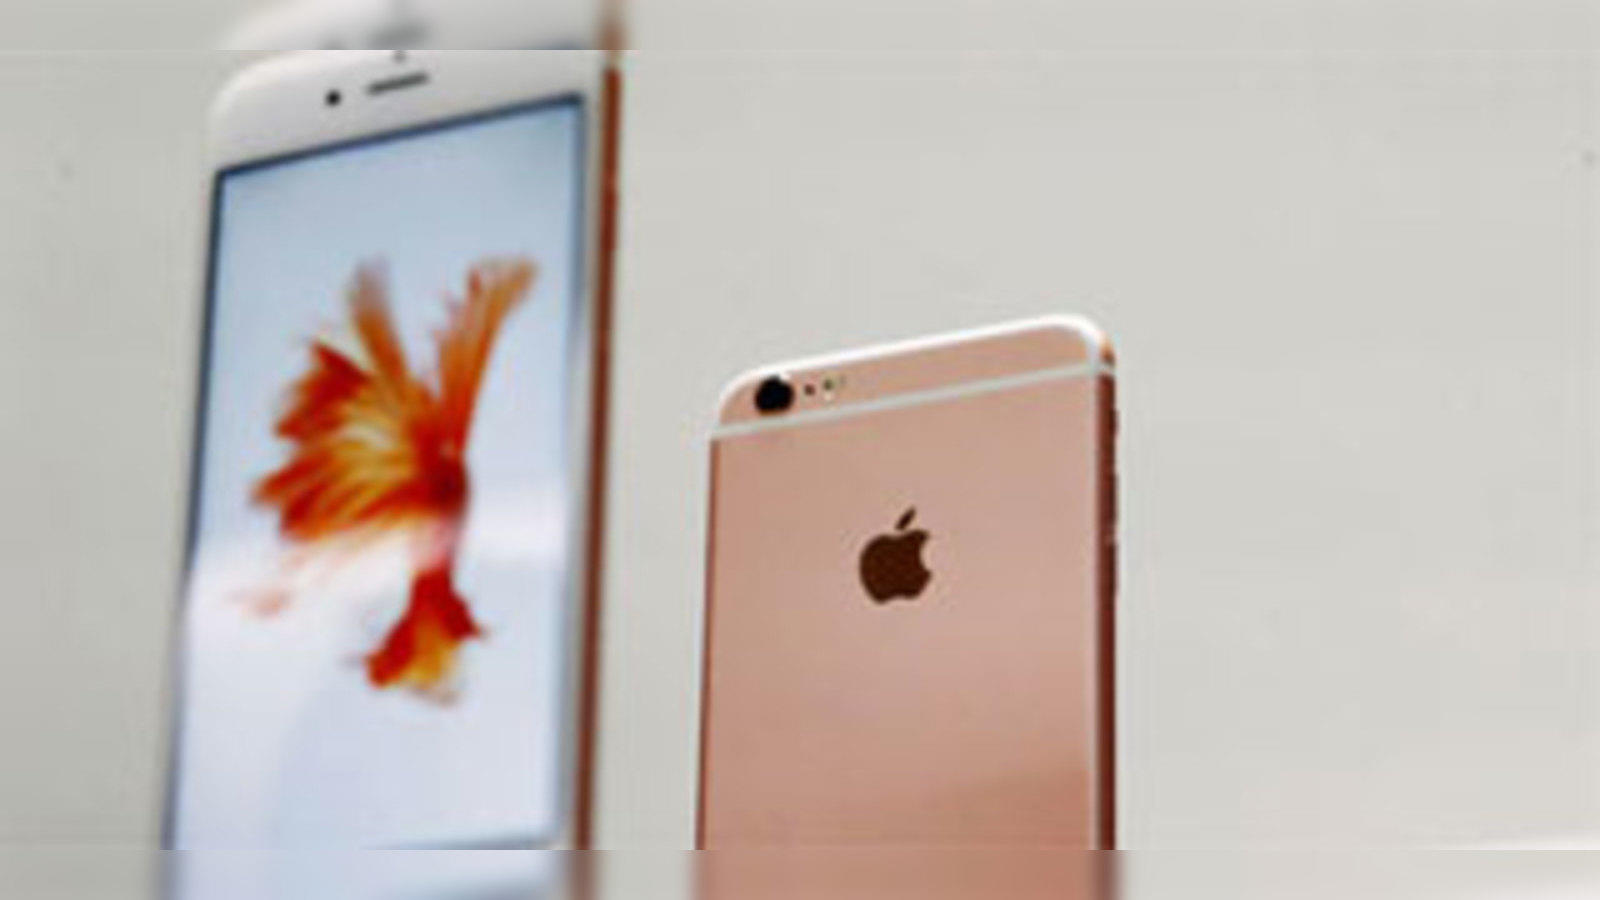 Apple cuts prices of latest iPhone 6s and 6s Plus by up to 16% in